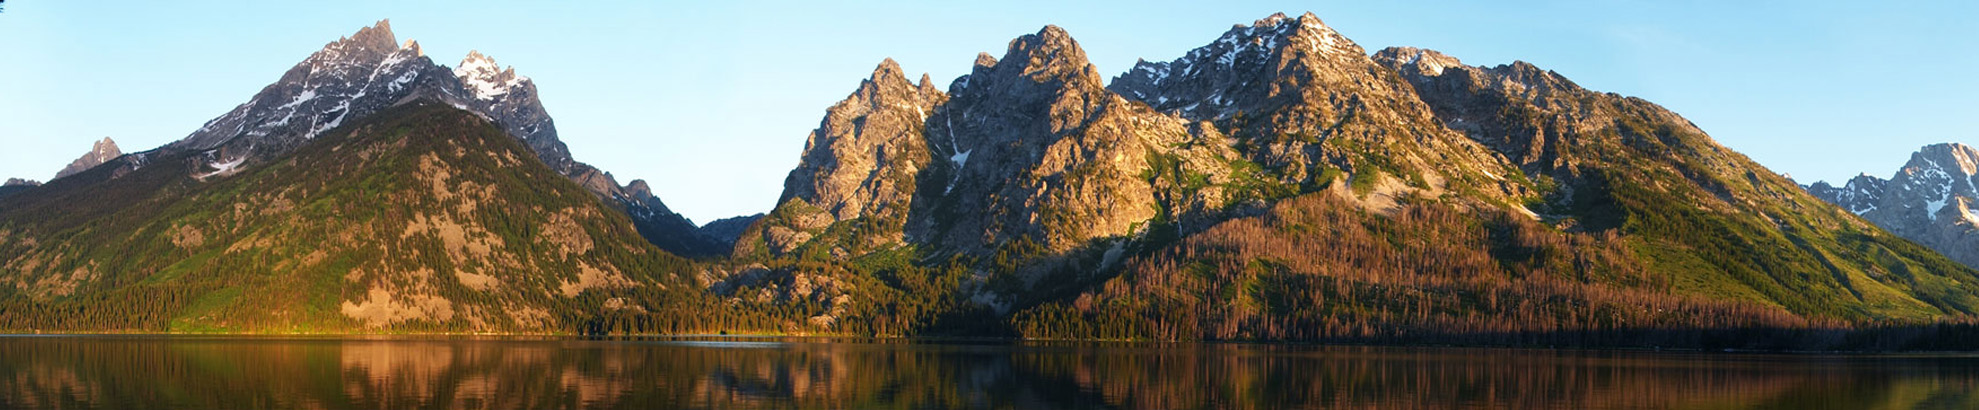 Lake with mountain in background